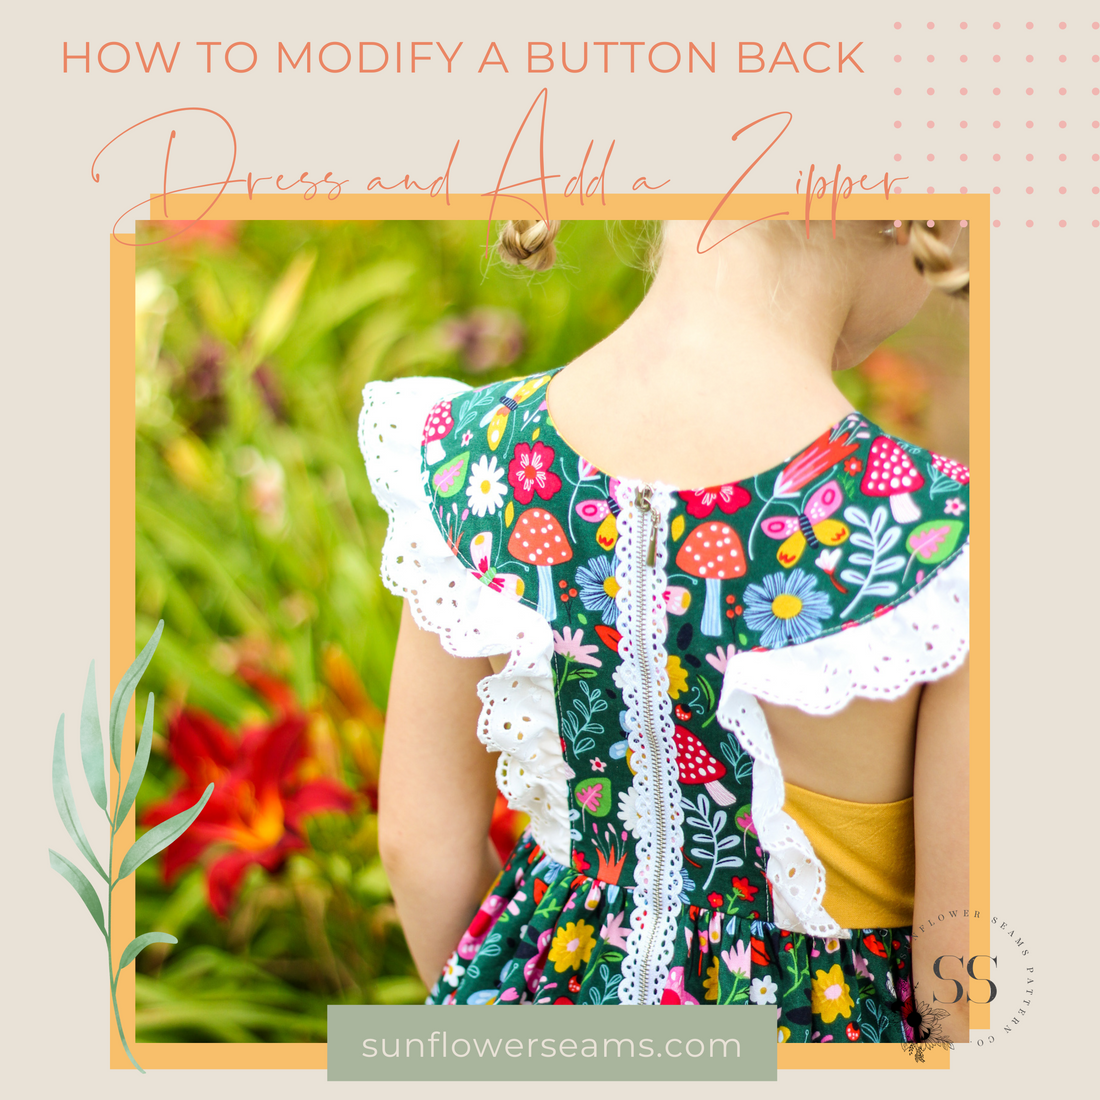 How to Modify a Button Back Dress and Add a Zipper {A Tutorial}